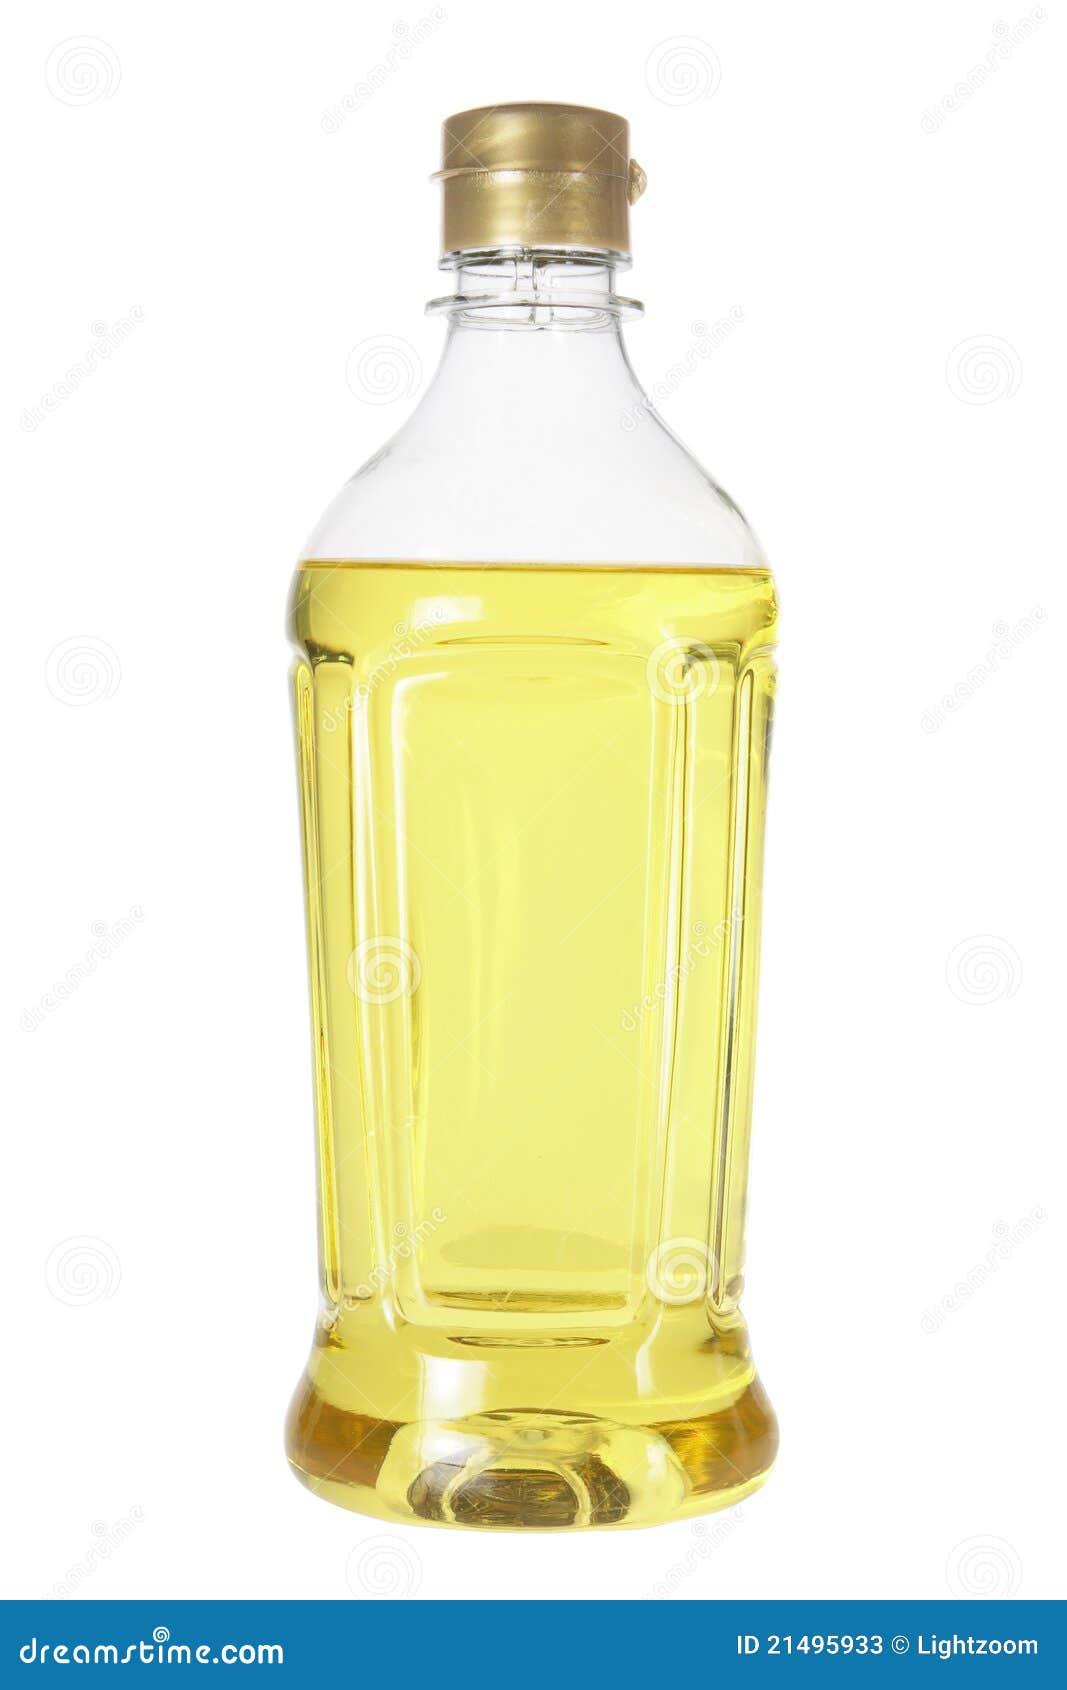 cooking oil clipart - photo #48